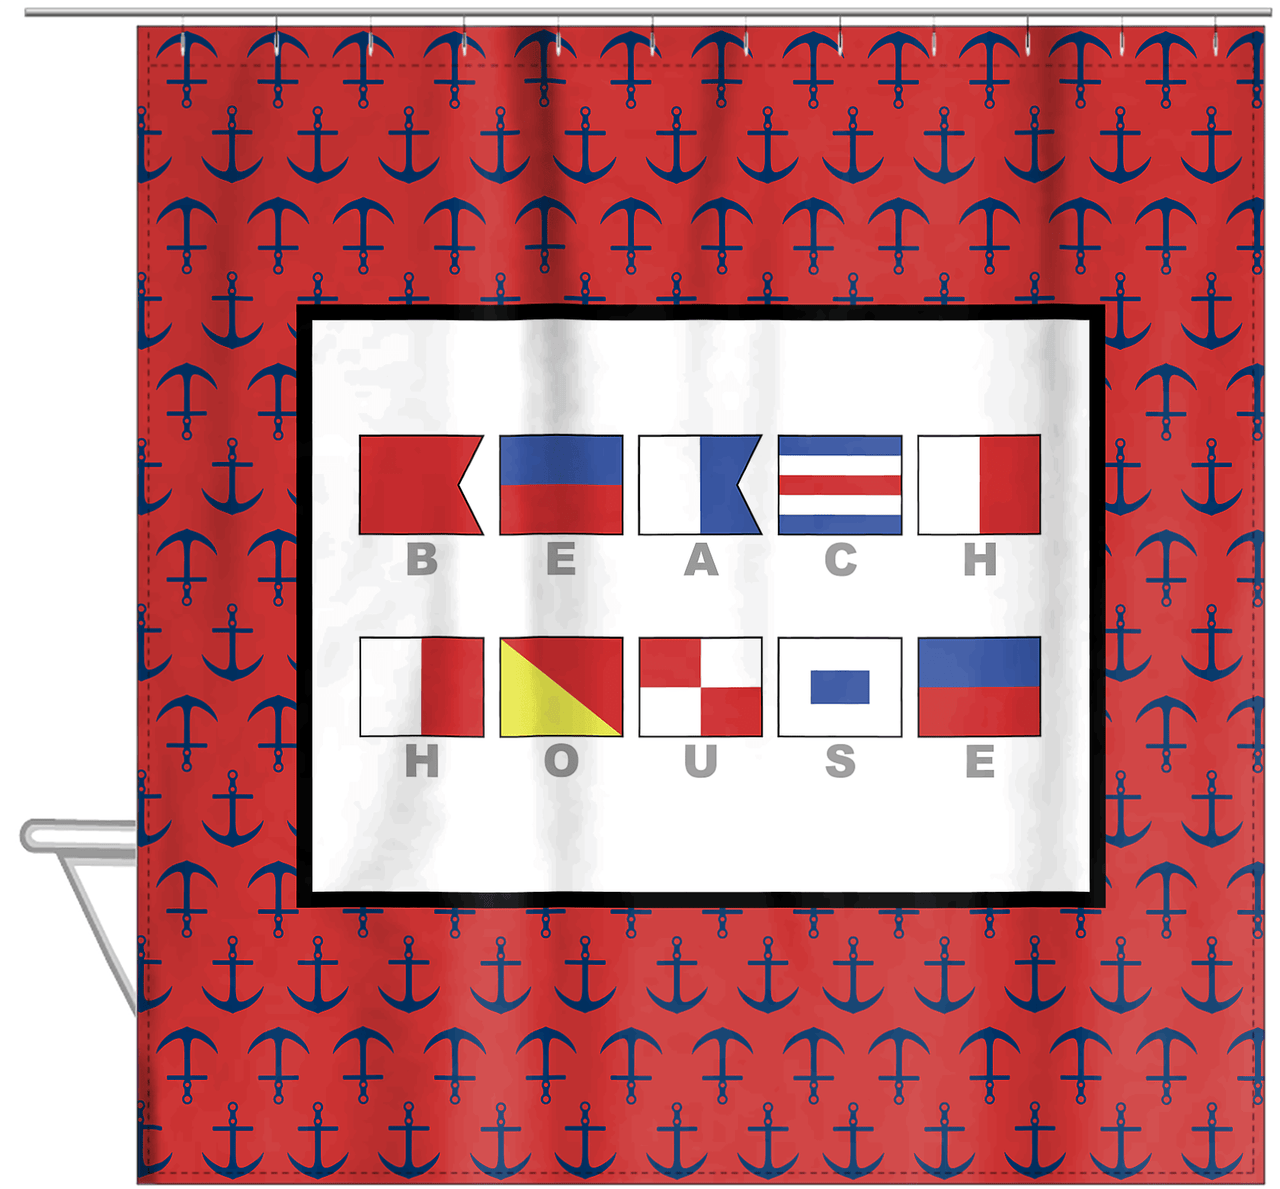 Personalized Nautical Flags Shower Curtain with Anchors - Red and Black - Flags with Grey Letters - Hanging View